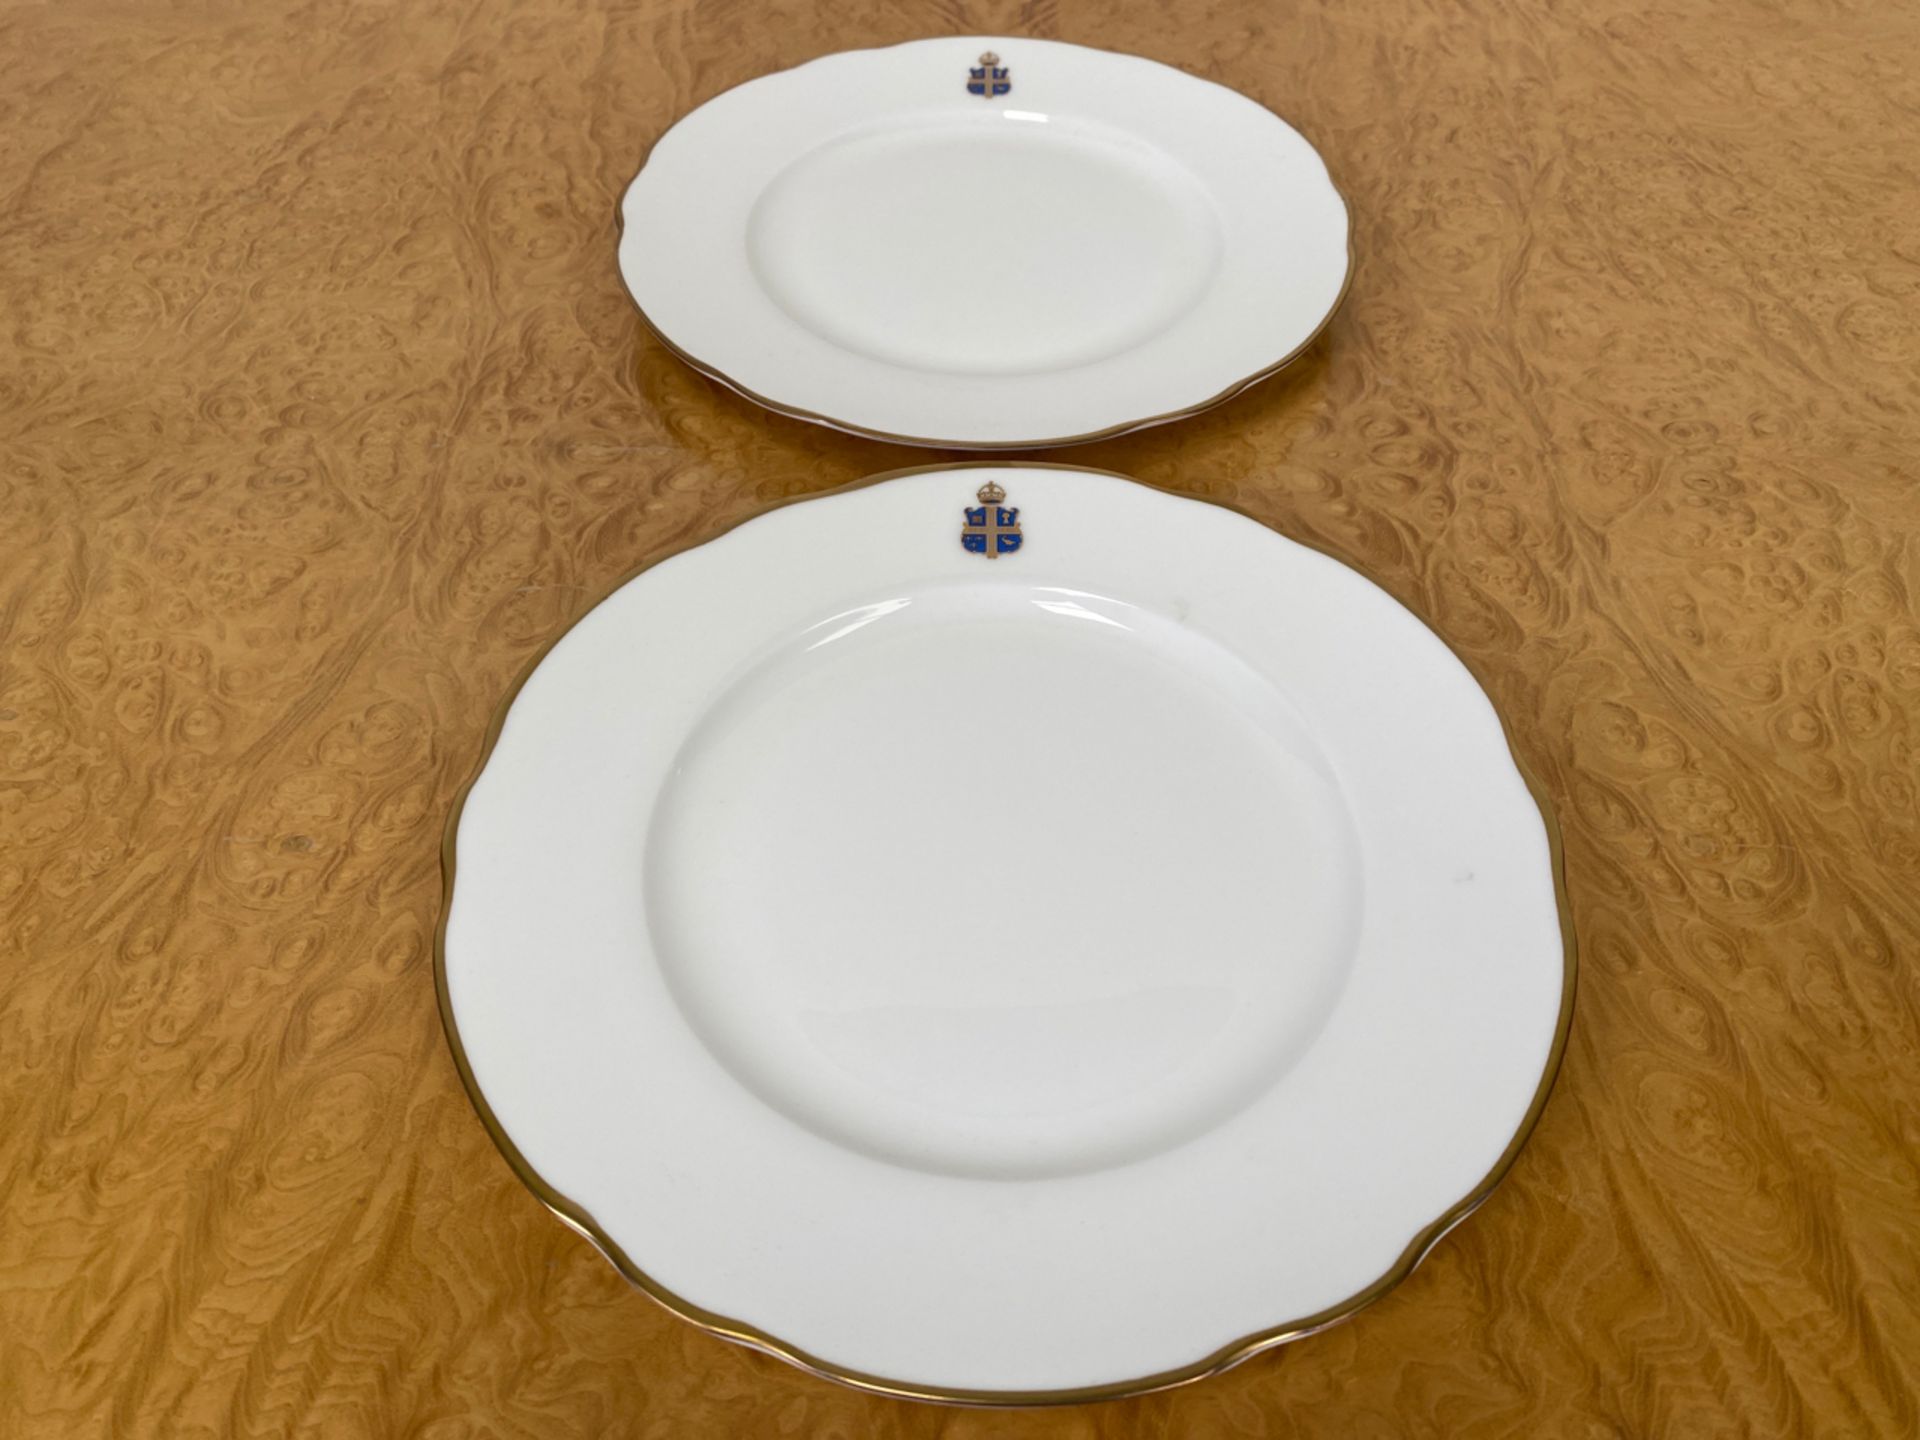 50 x Crested Plates for Claridge's by Chommette 1884 (25cm) - Image 3 of 6